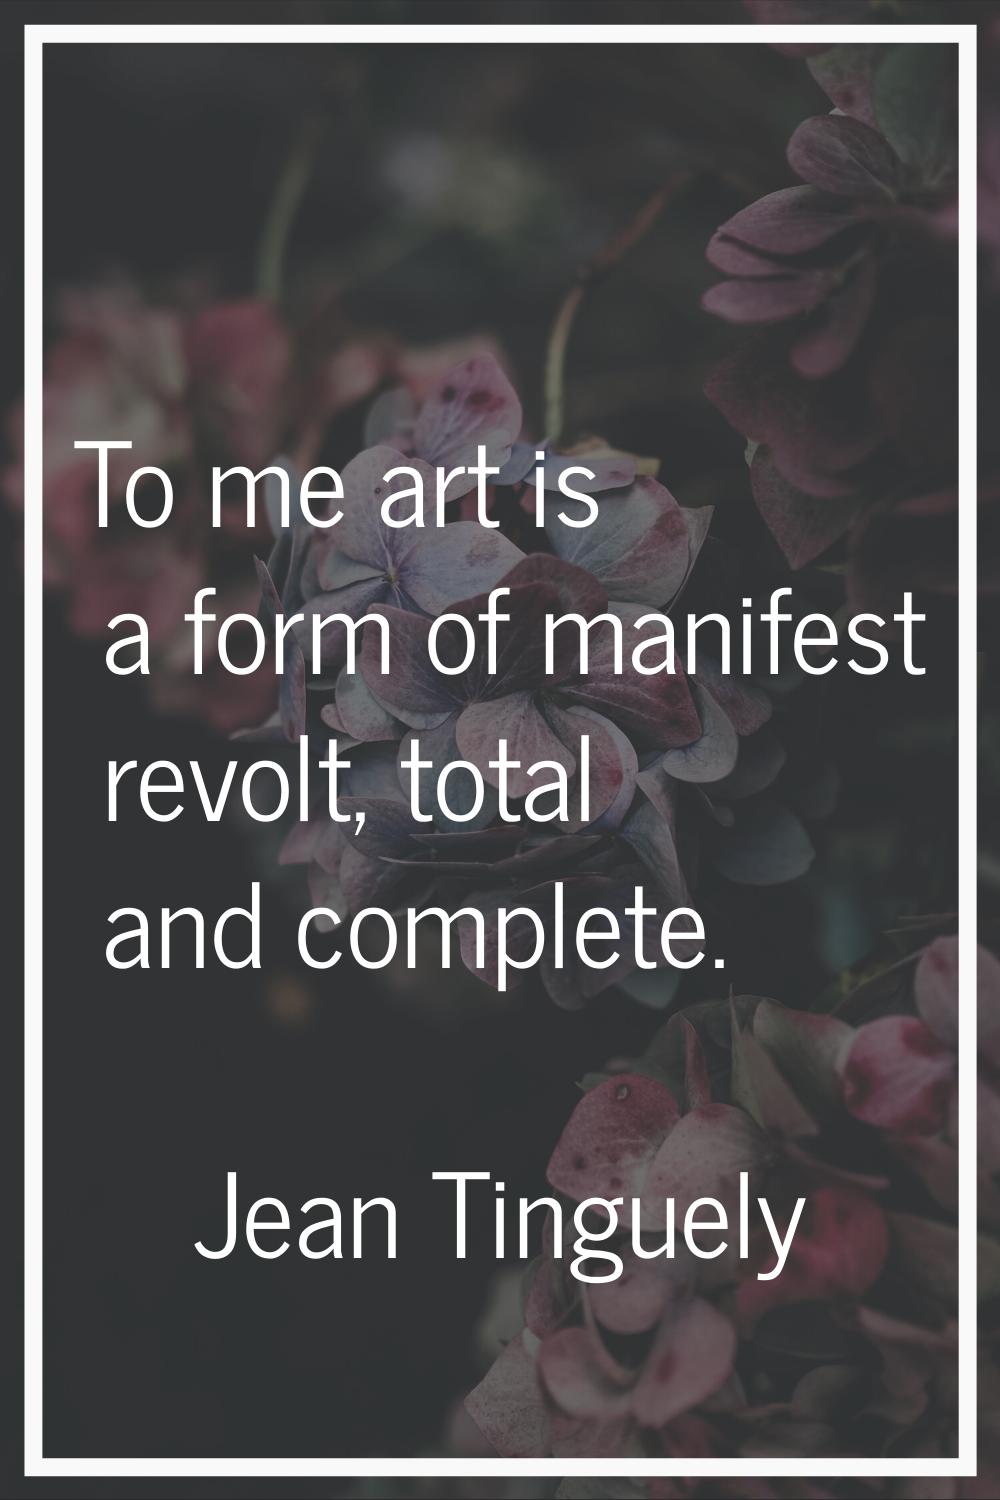 To me art is a form of manifest revolt, total and complete.